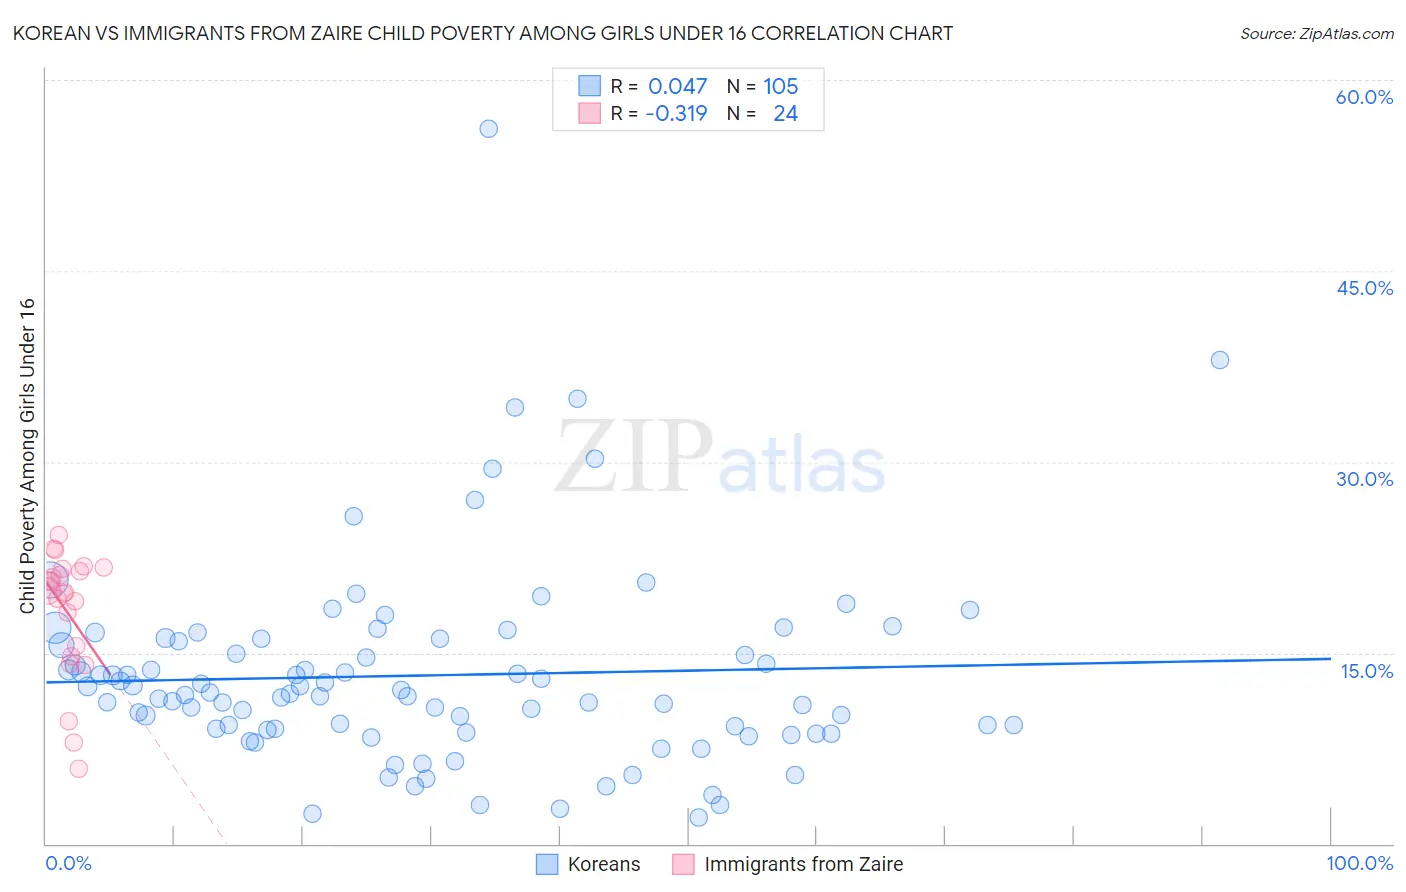 Korean vs Immigrants from Zaire Child Poverty Among Girls Under 16